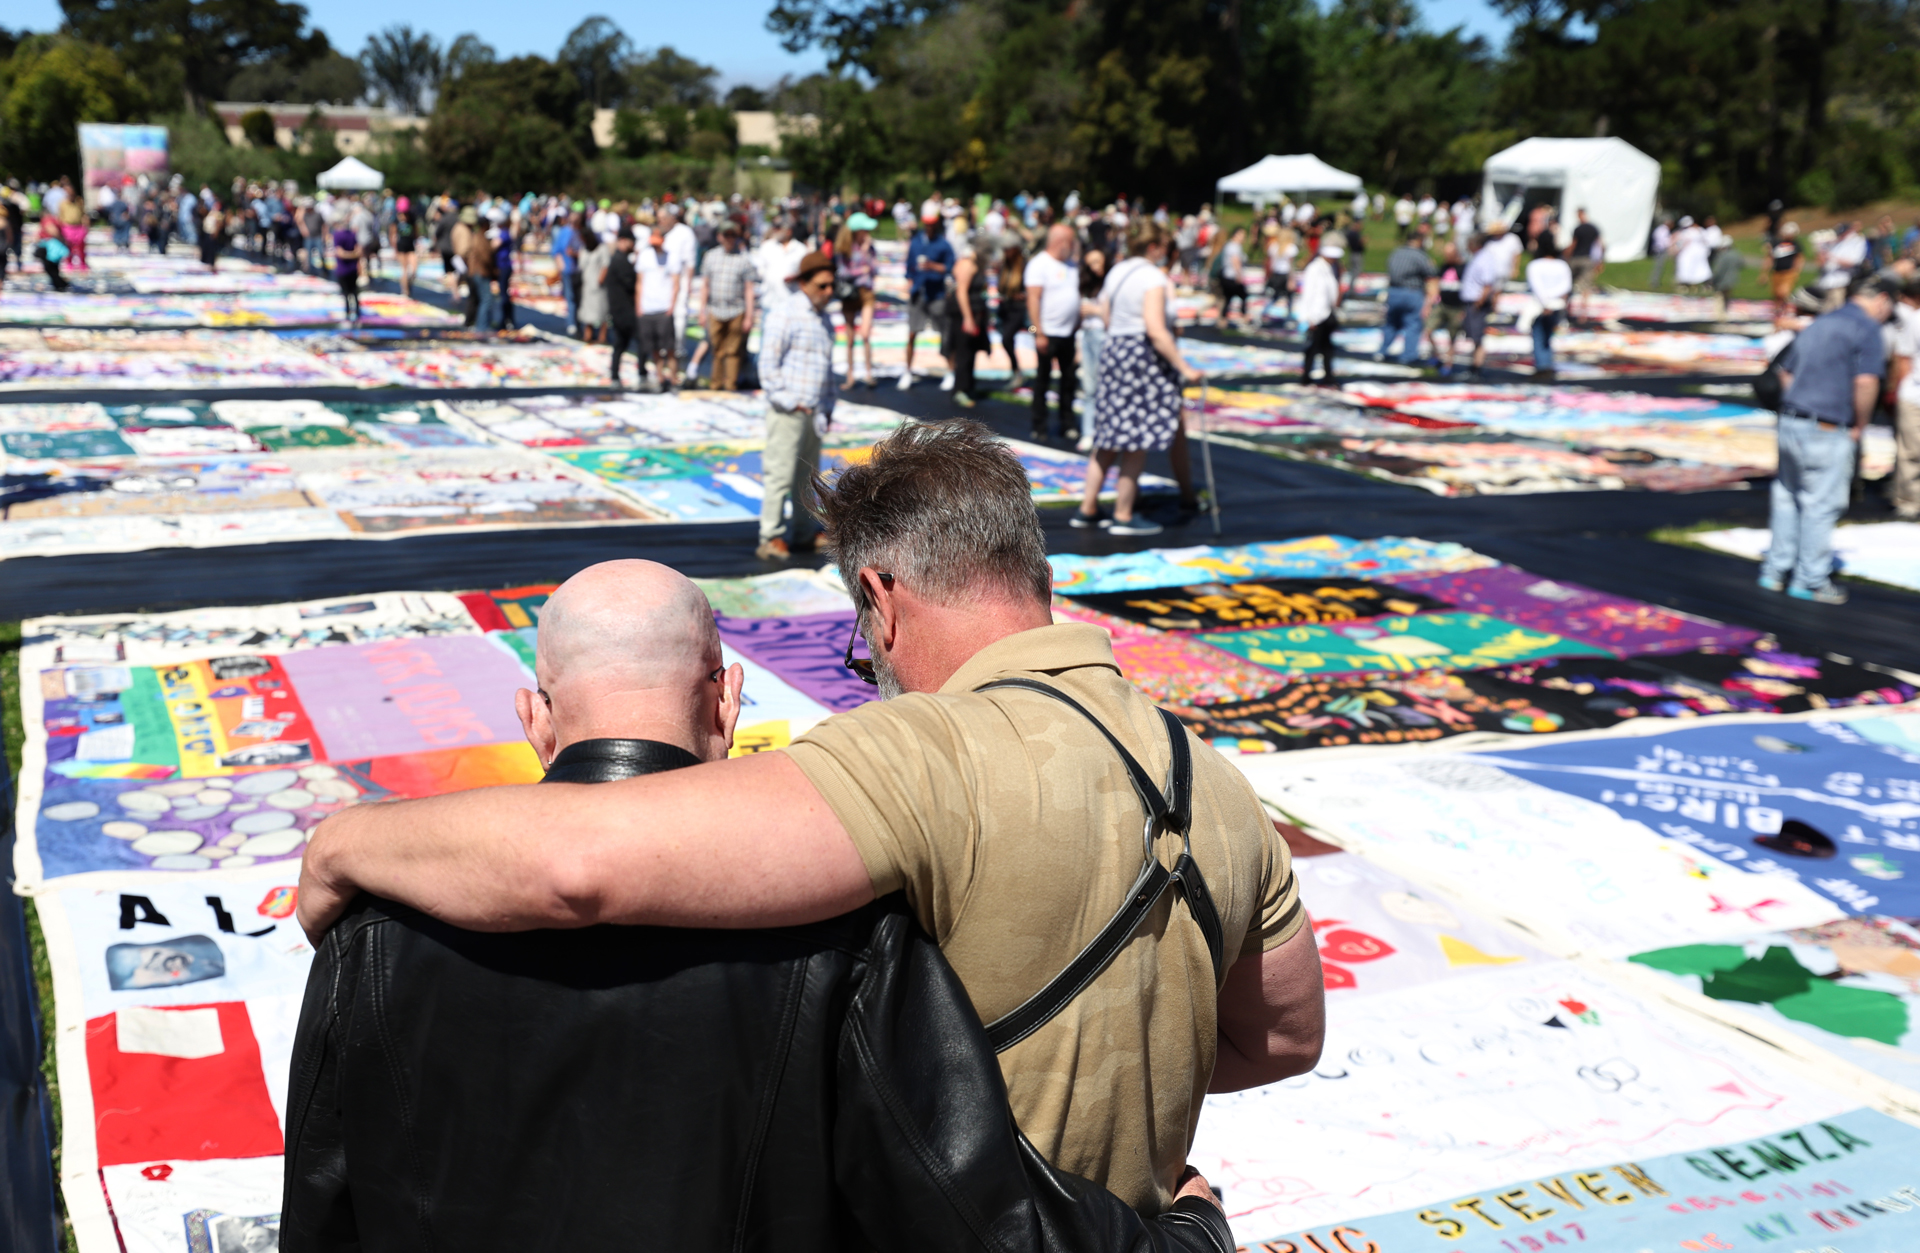 Two white men stand arm in arm looking down at embellished fabric panels, crowd in distance